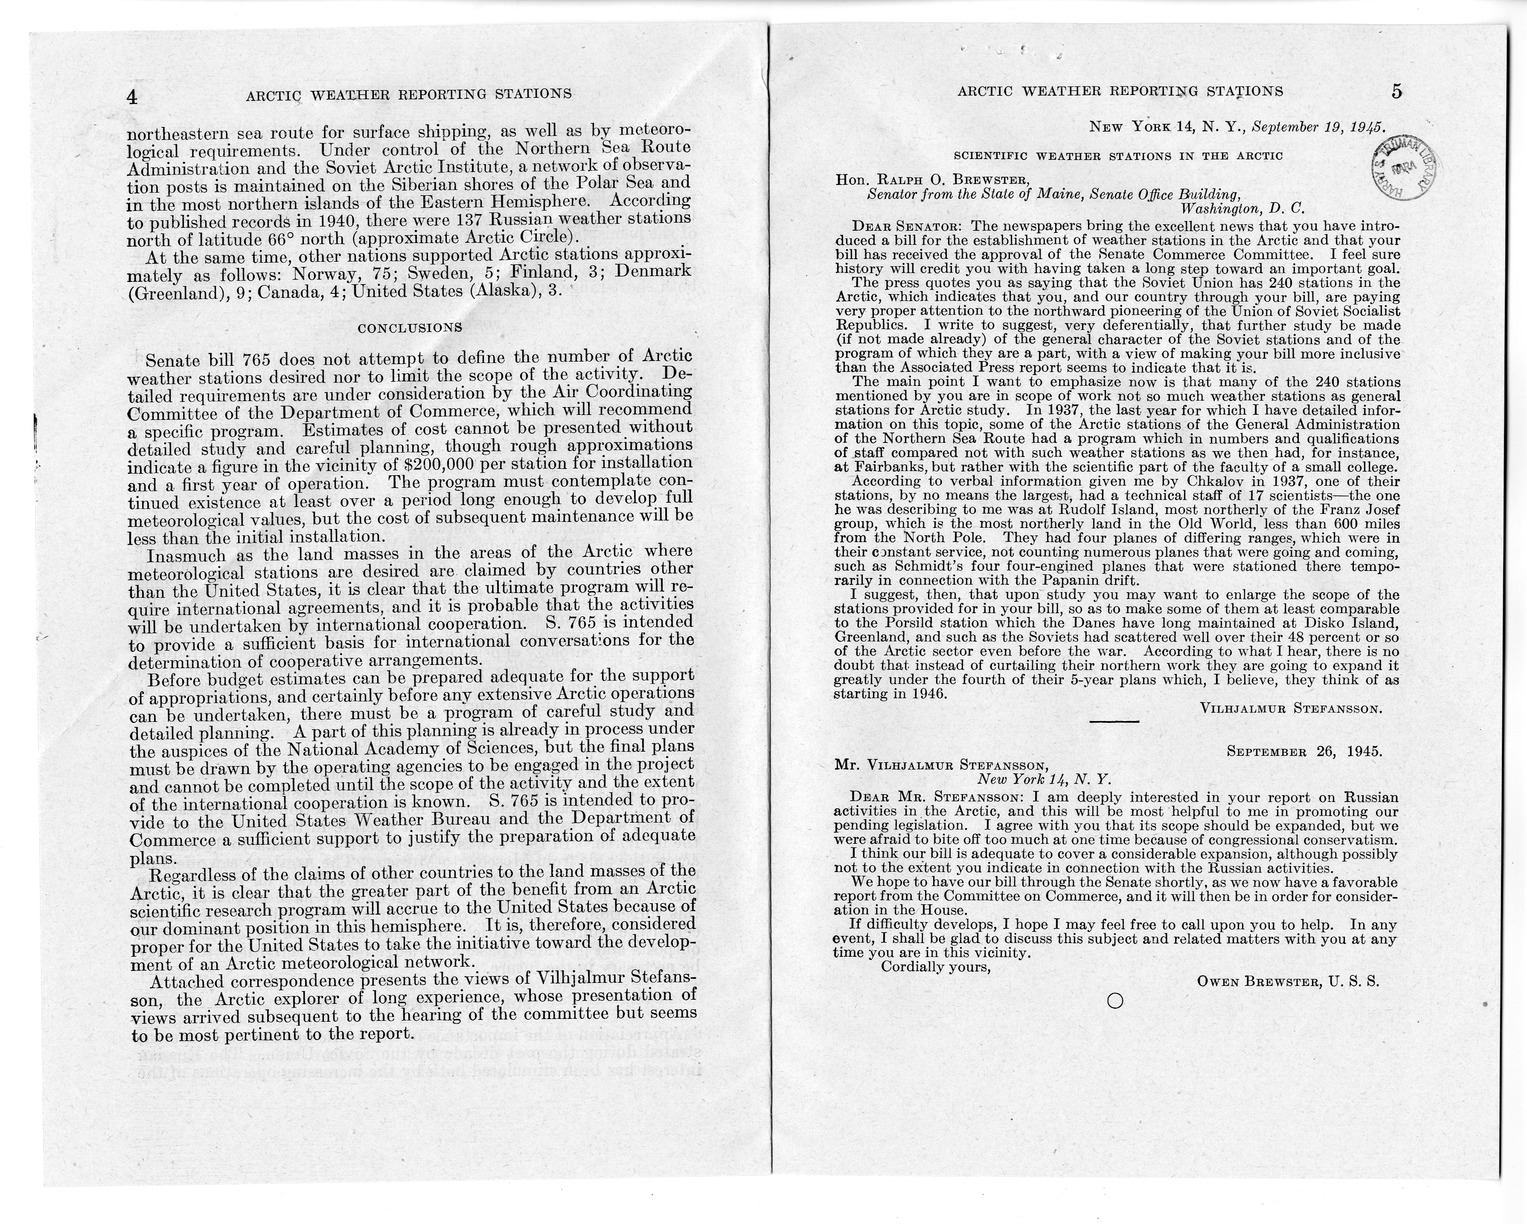 Memorandum from Harold D. Smith to M. C. Latta, S. 765, Concerning the Establishment of Meteorological Observation Stations in the Arctic Region of the Western Hemisphere, for the Purpose of Improving the Weather Forecasting Service Within the United States and on the Civil International Air Transport Routes From the United States, with Attachments